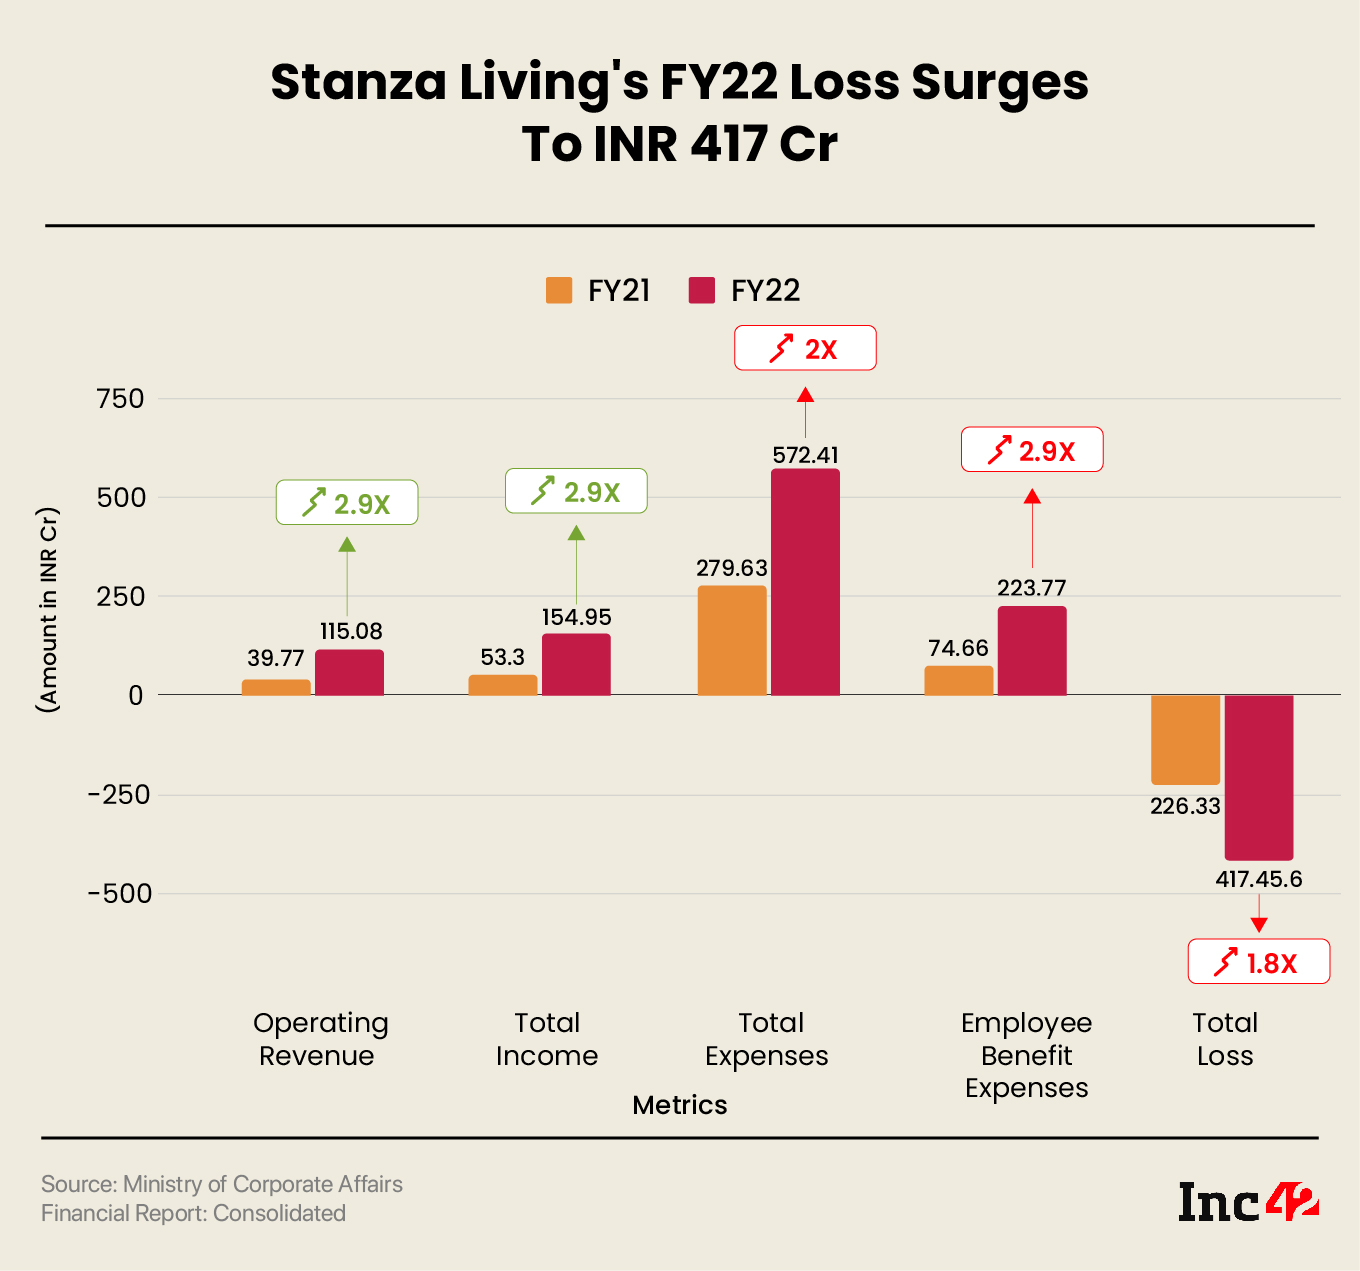 Stanza Living's FY22 Loss Surges to INR 417 Cr